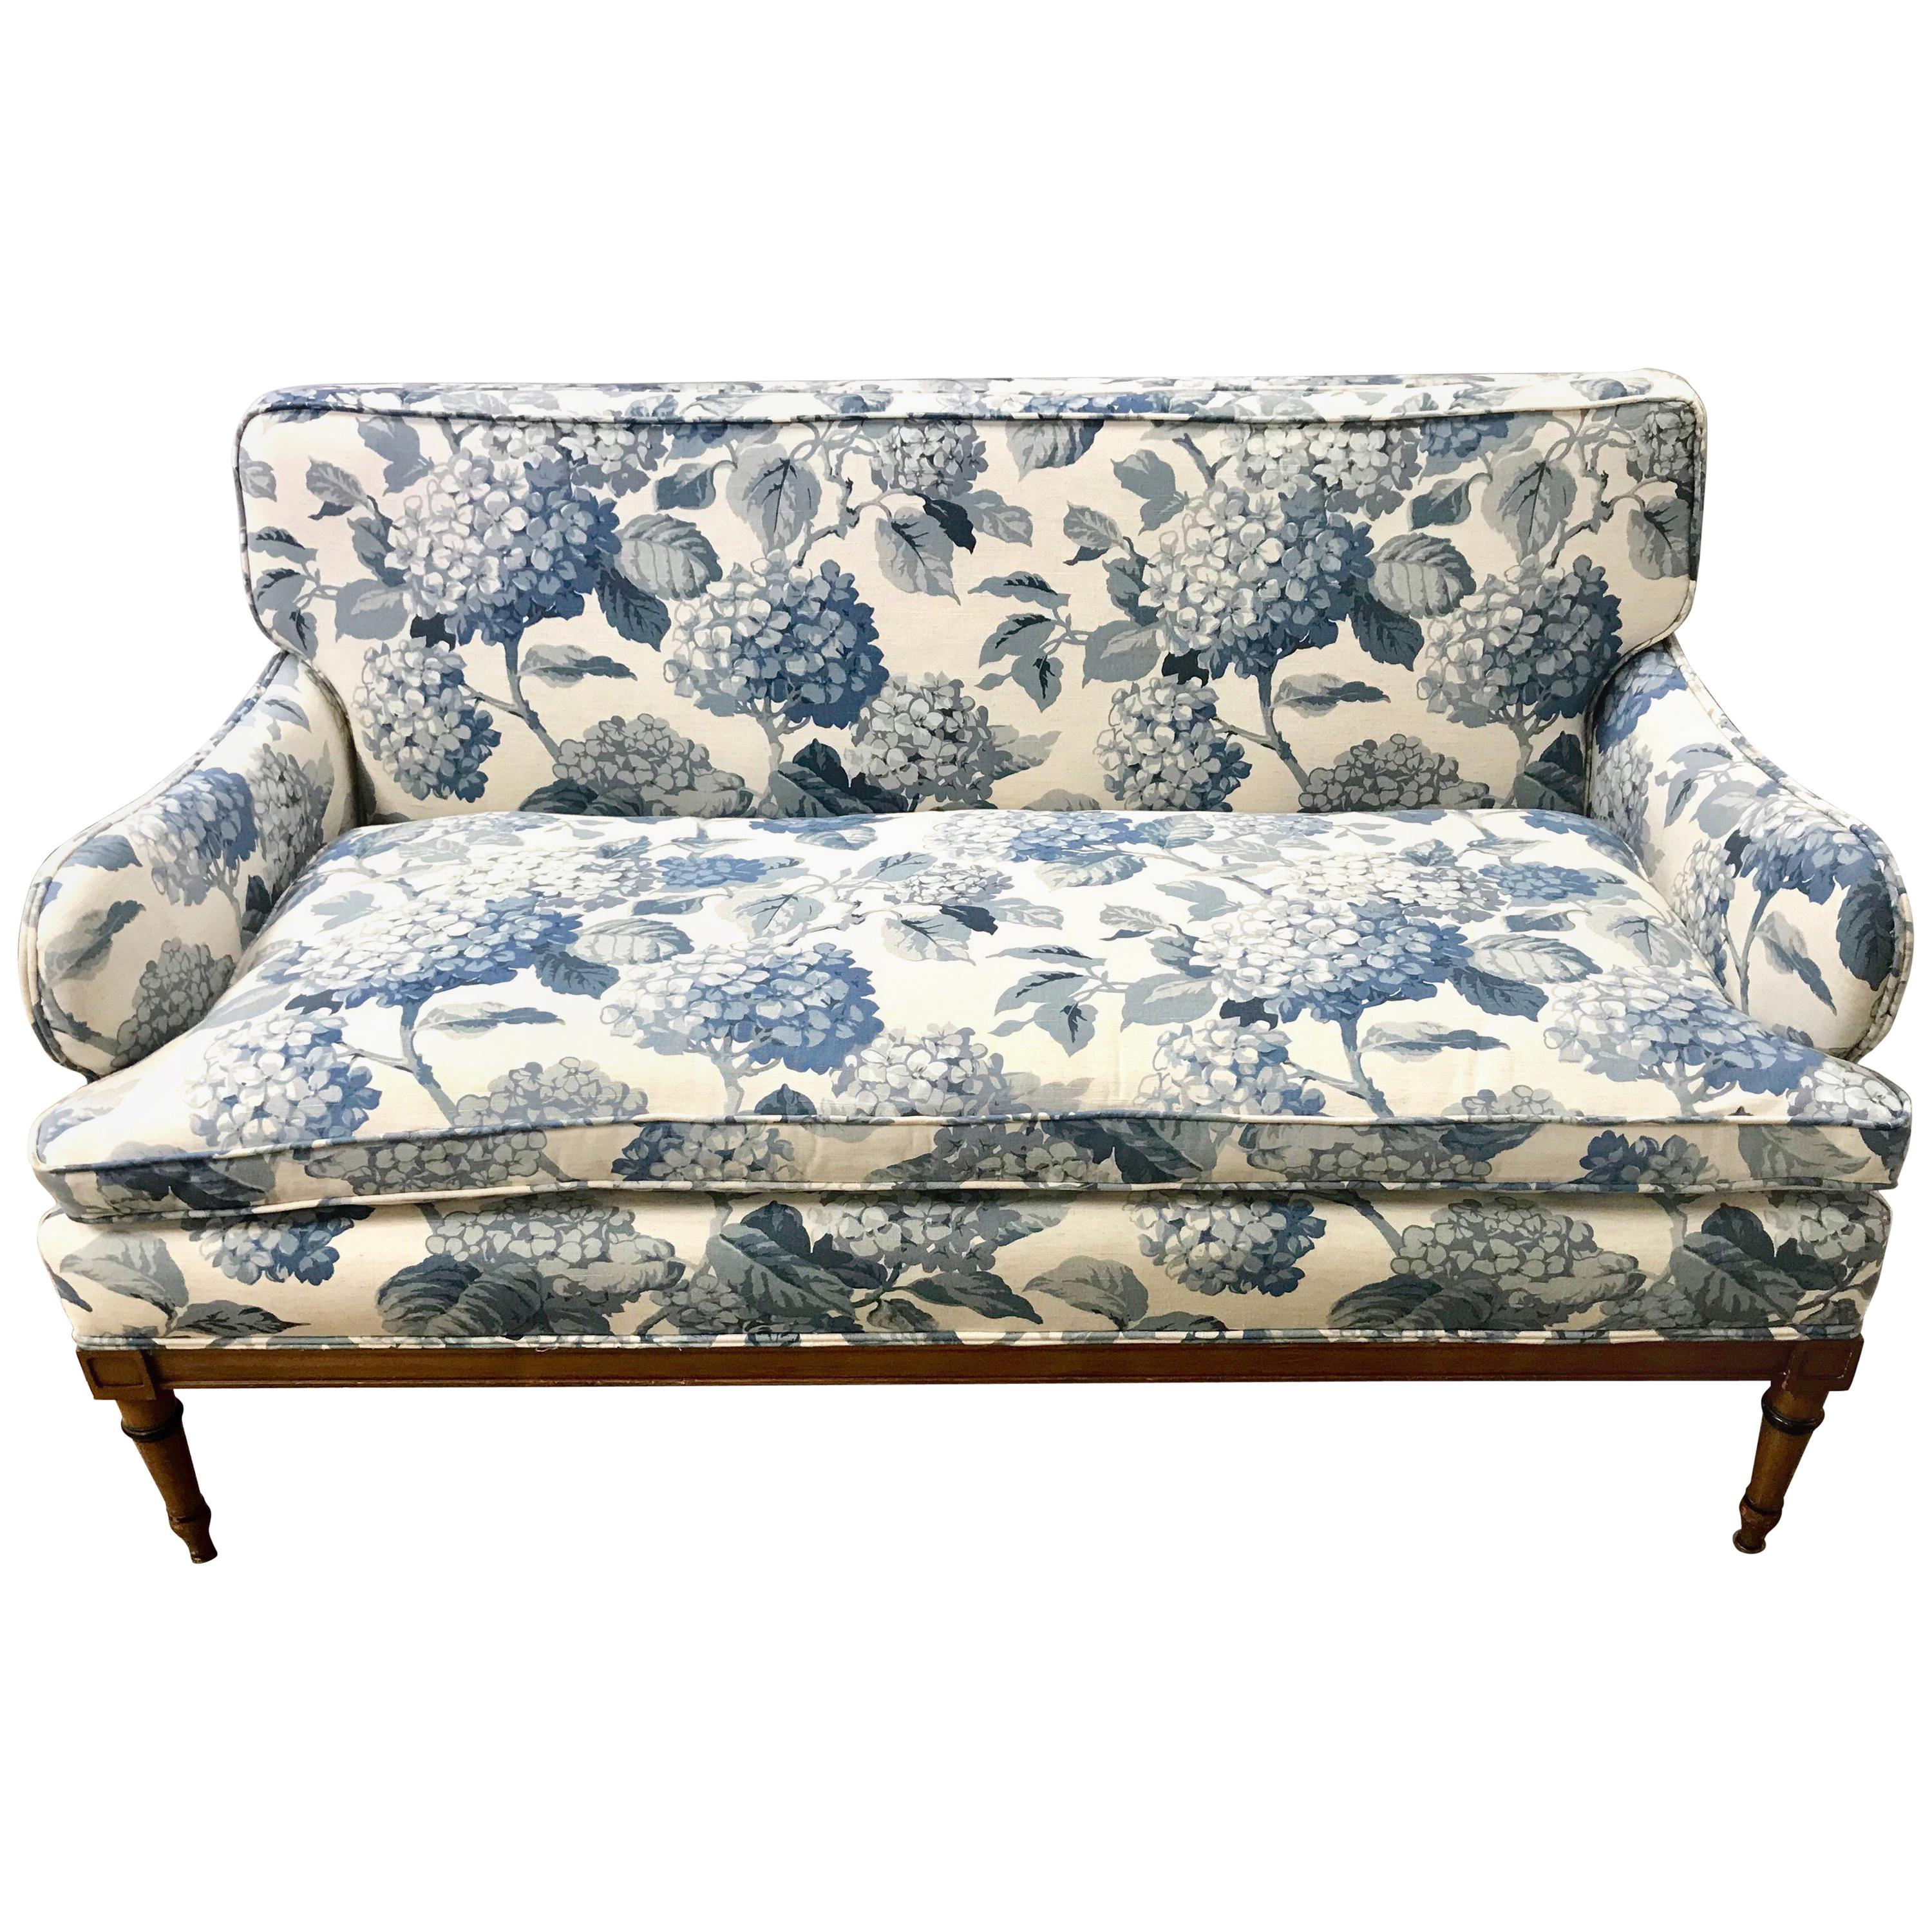 Antique Blue and White Upholstered Loveseat Settee Sofa 